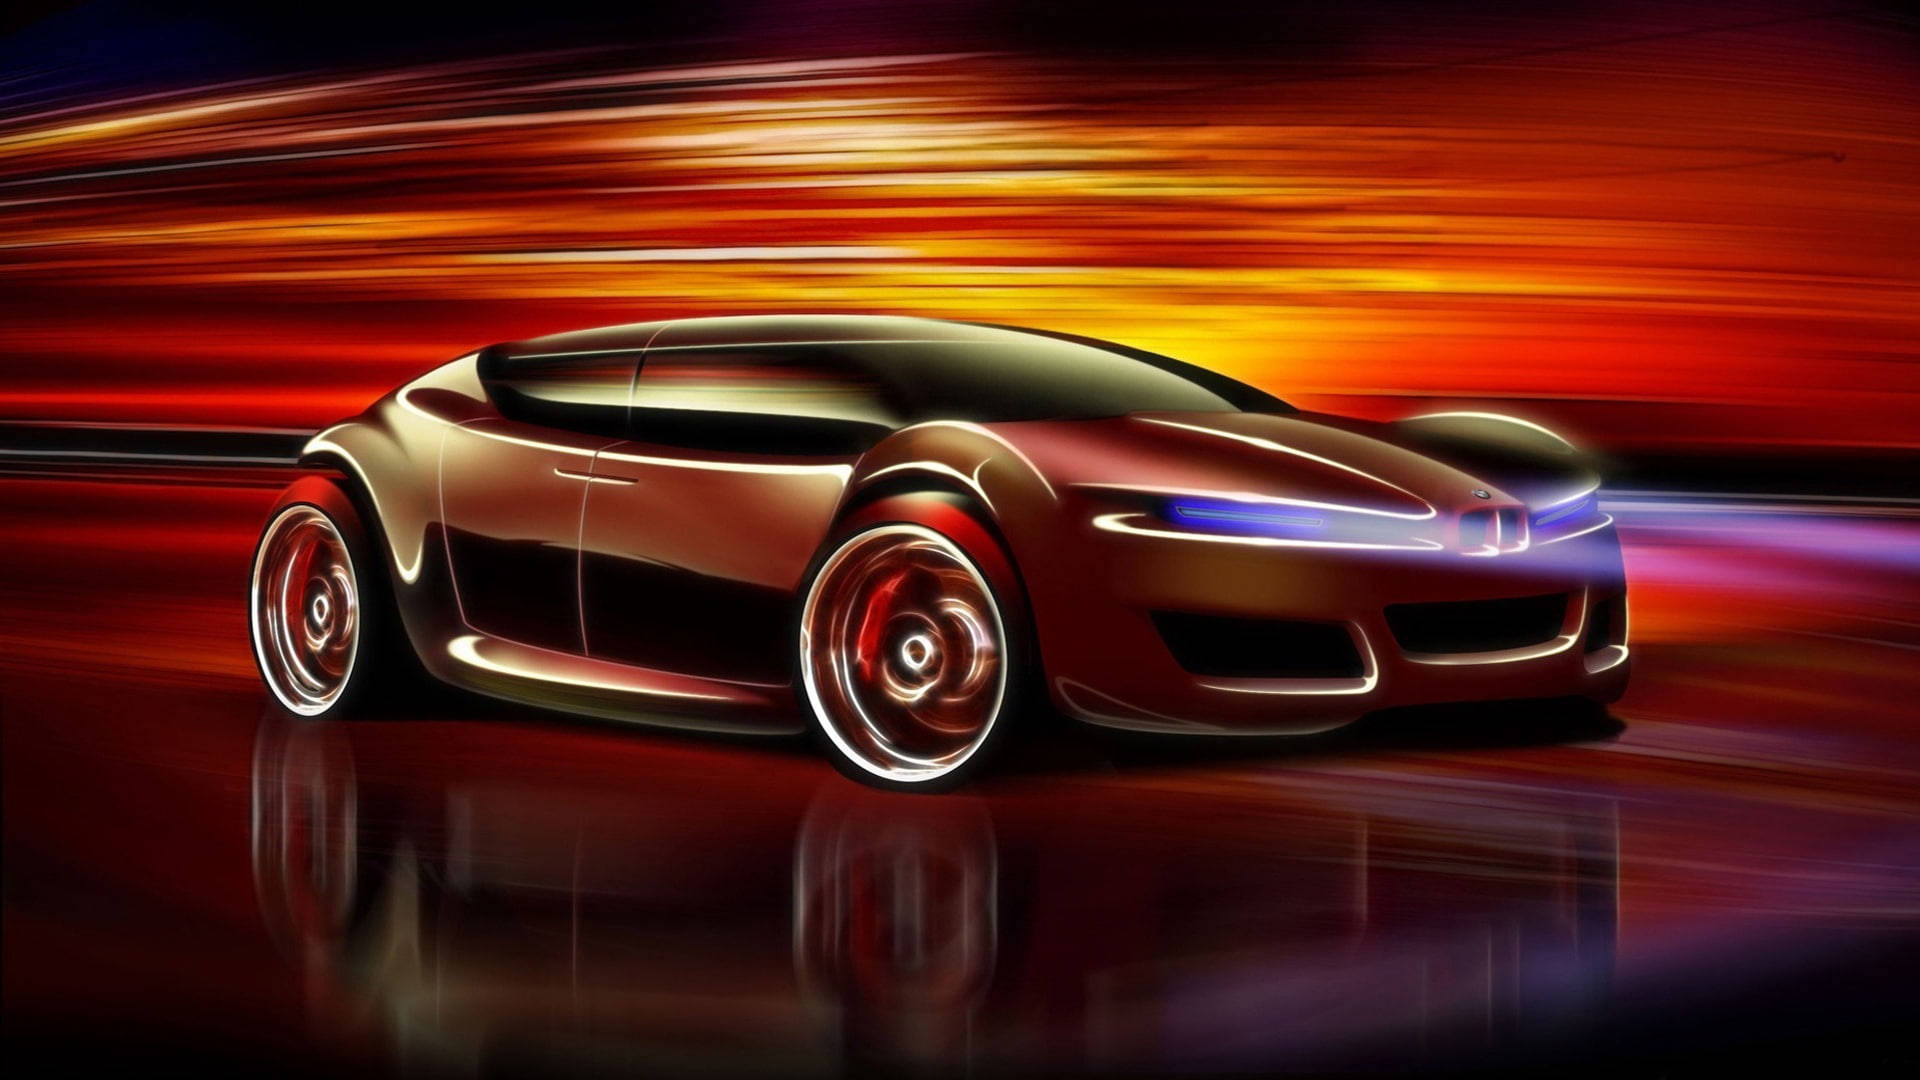 Caption: Stunning Shiny Red 3d Car In High Definition Background